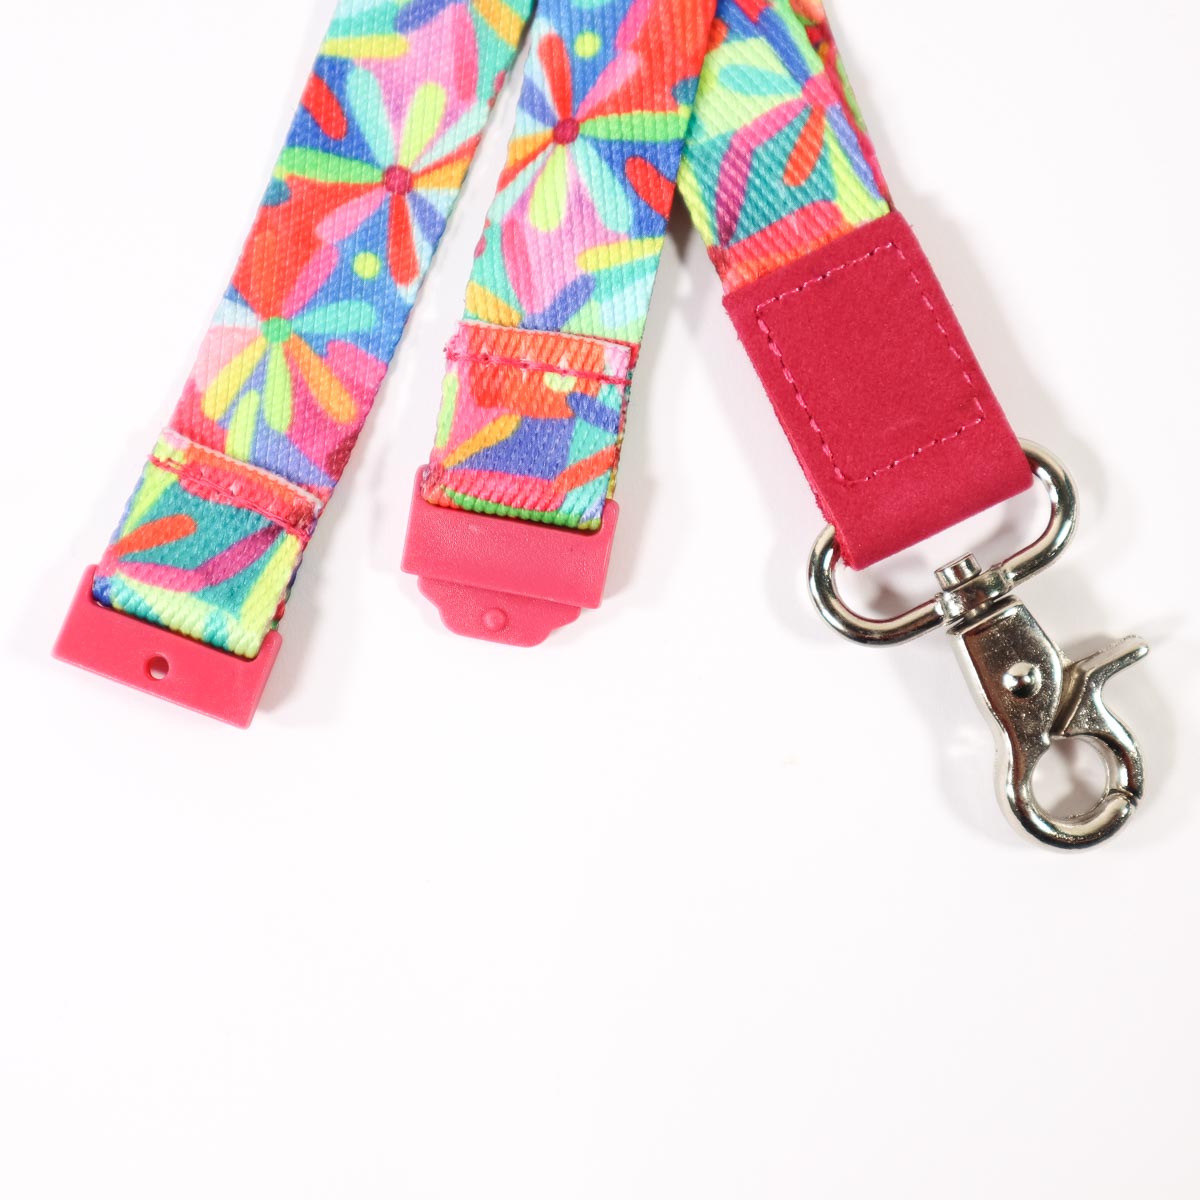 Multi coloured flower patterned lanyard with safety clasp.